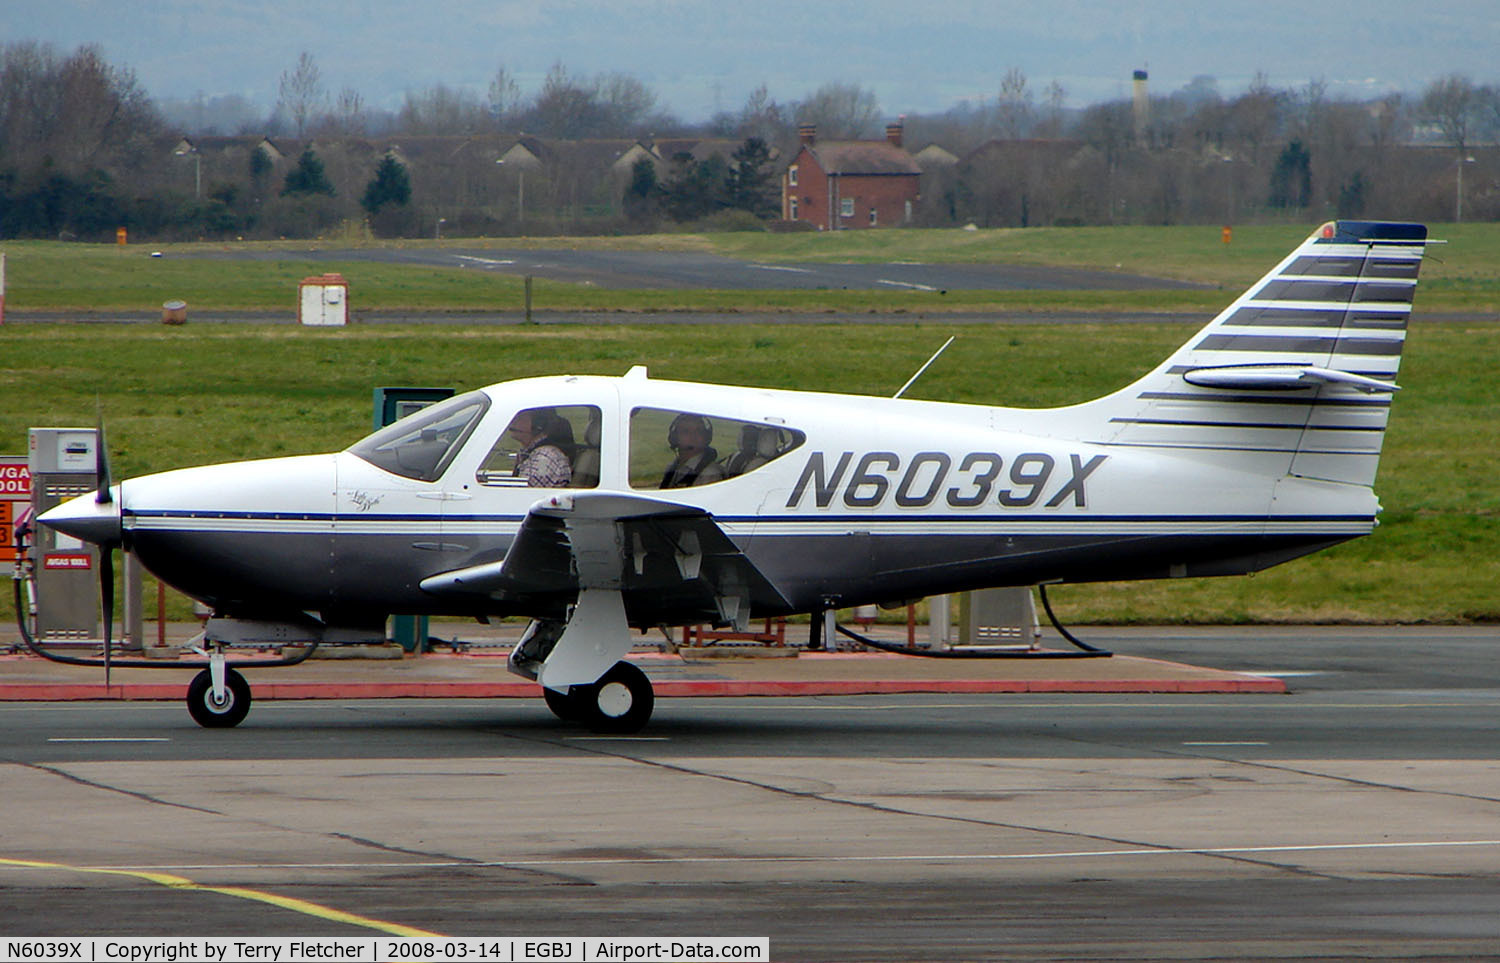 N6039X, 1995 Rockwell Commander 114-B C/N 14639, A visitor to Gloucestershire Airport on the day of the horse racing Gold Cup  at the nearby Cheltenham Racecourse